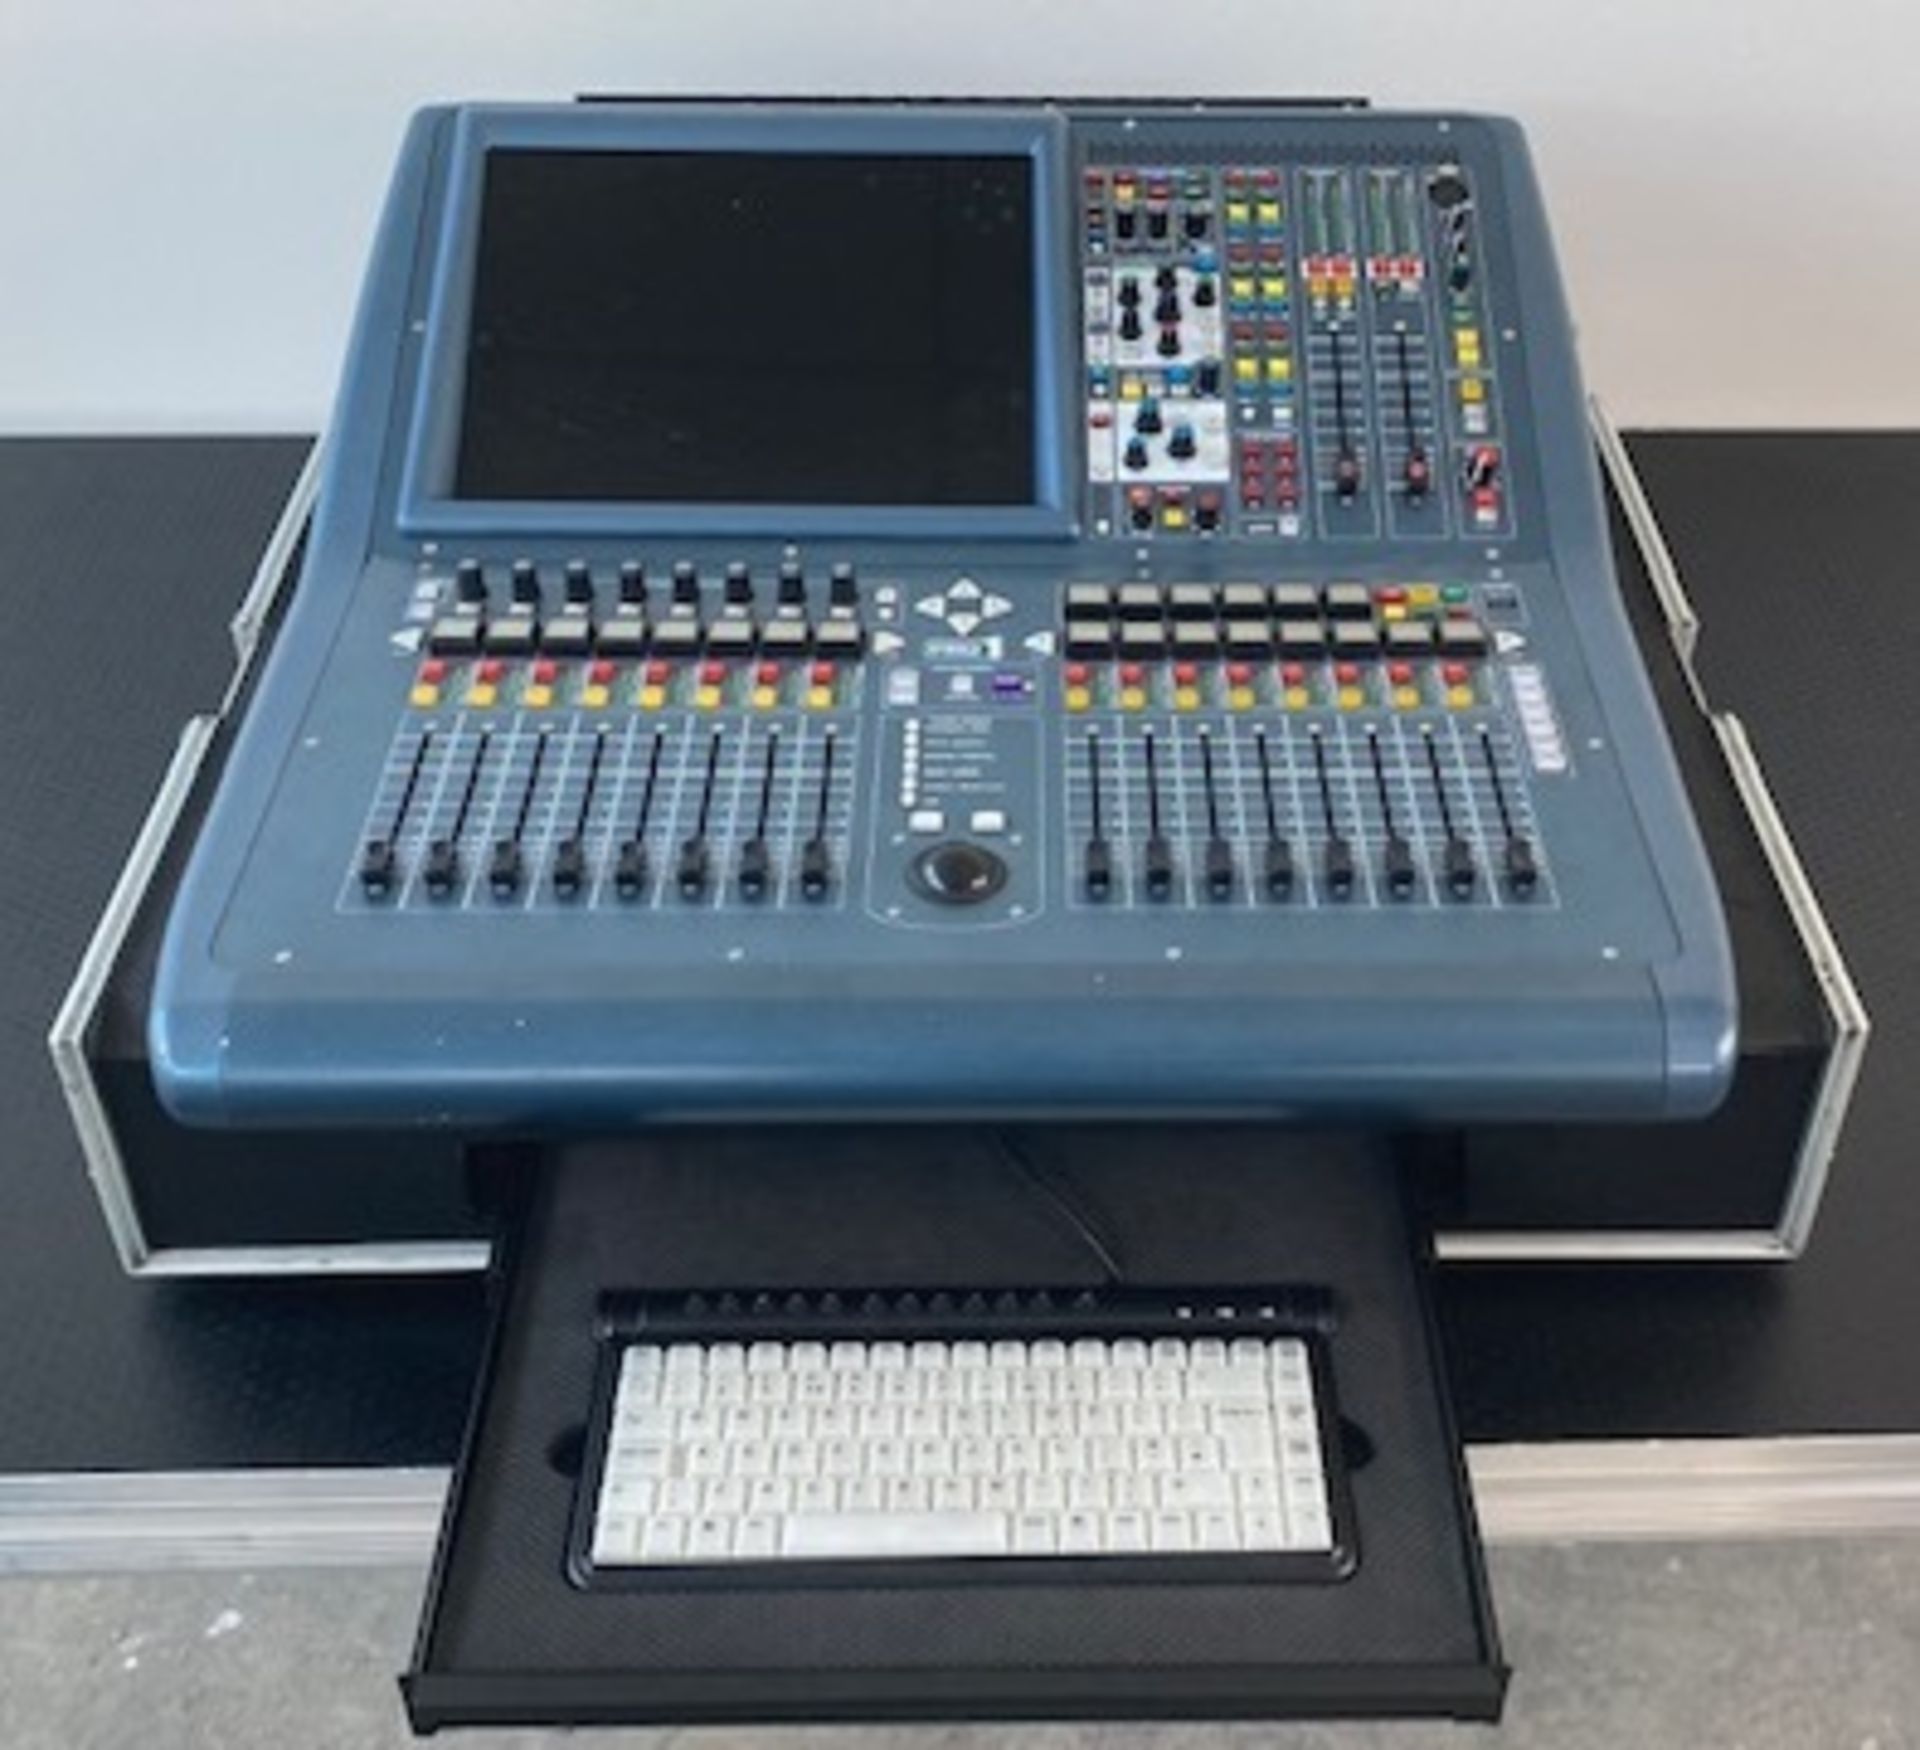 1 x Midas Pro One 24 Channel Digital Mixer Inc Dust Cover In Flight Case - Ref: 888 - CL581 - - Image 2 of 3